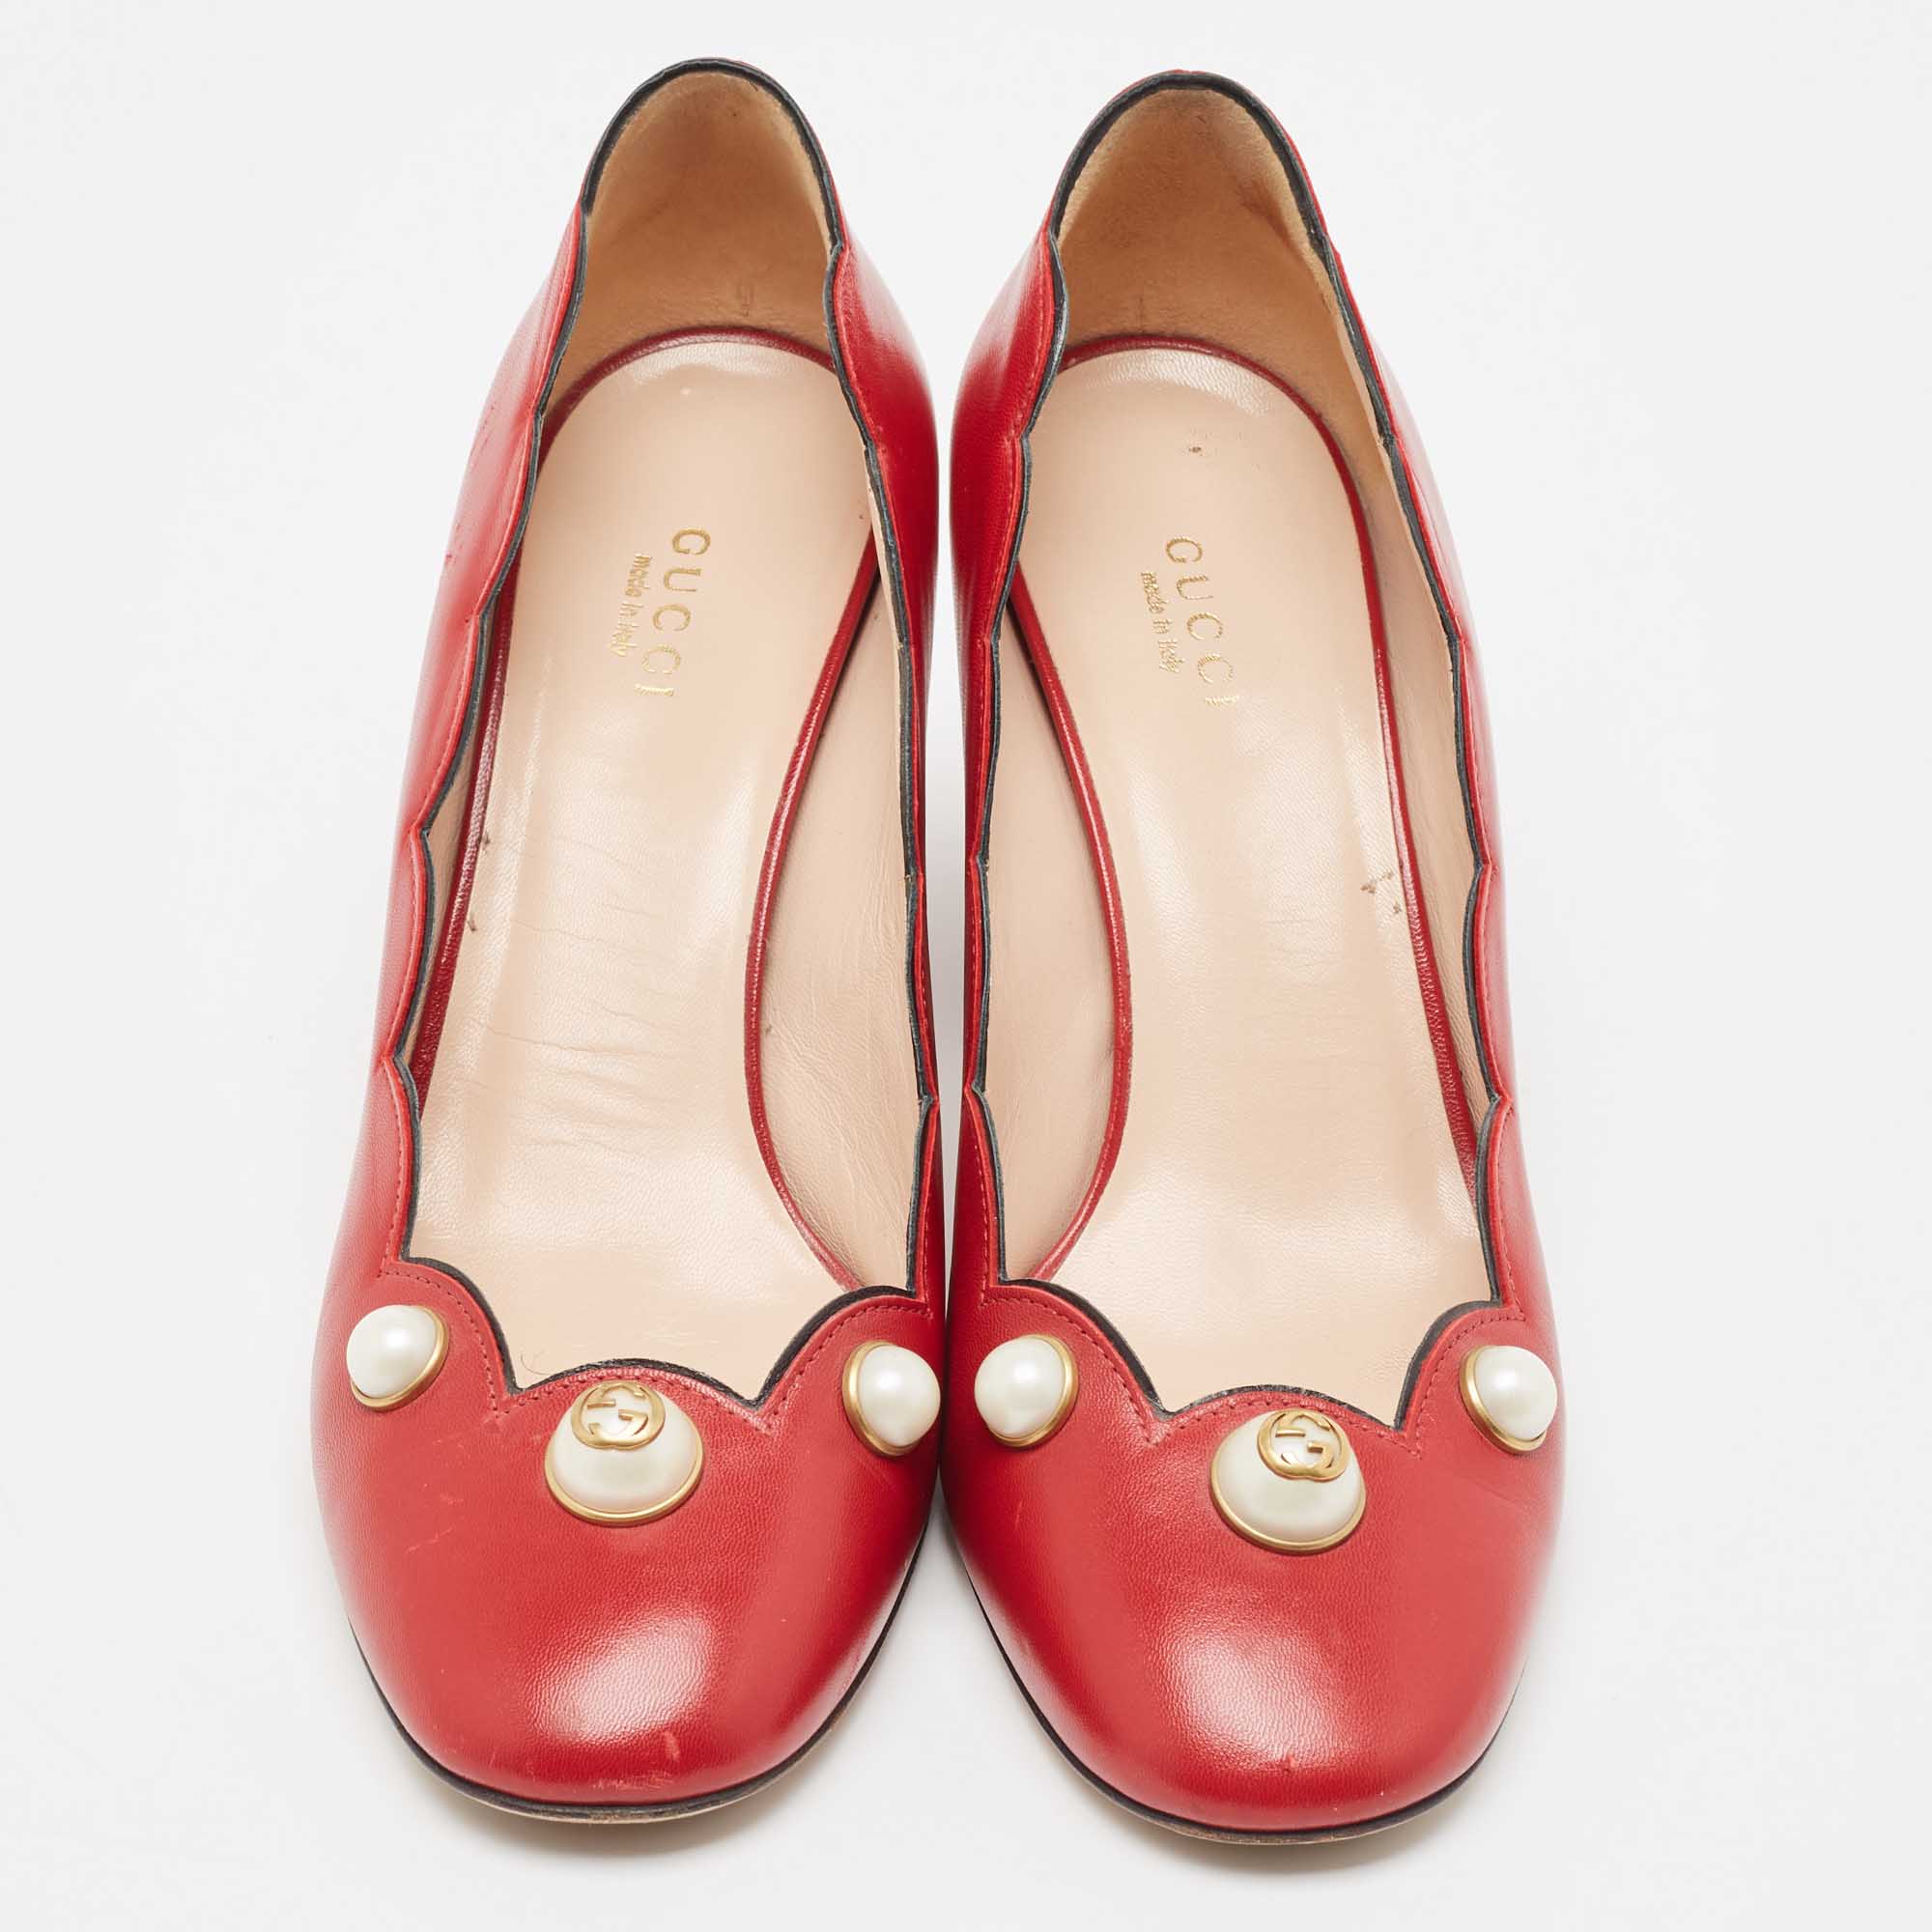 Gucci Red Leather Willow Faux Pearl Block Heel Pumps Size 38